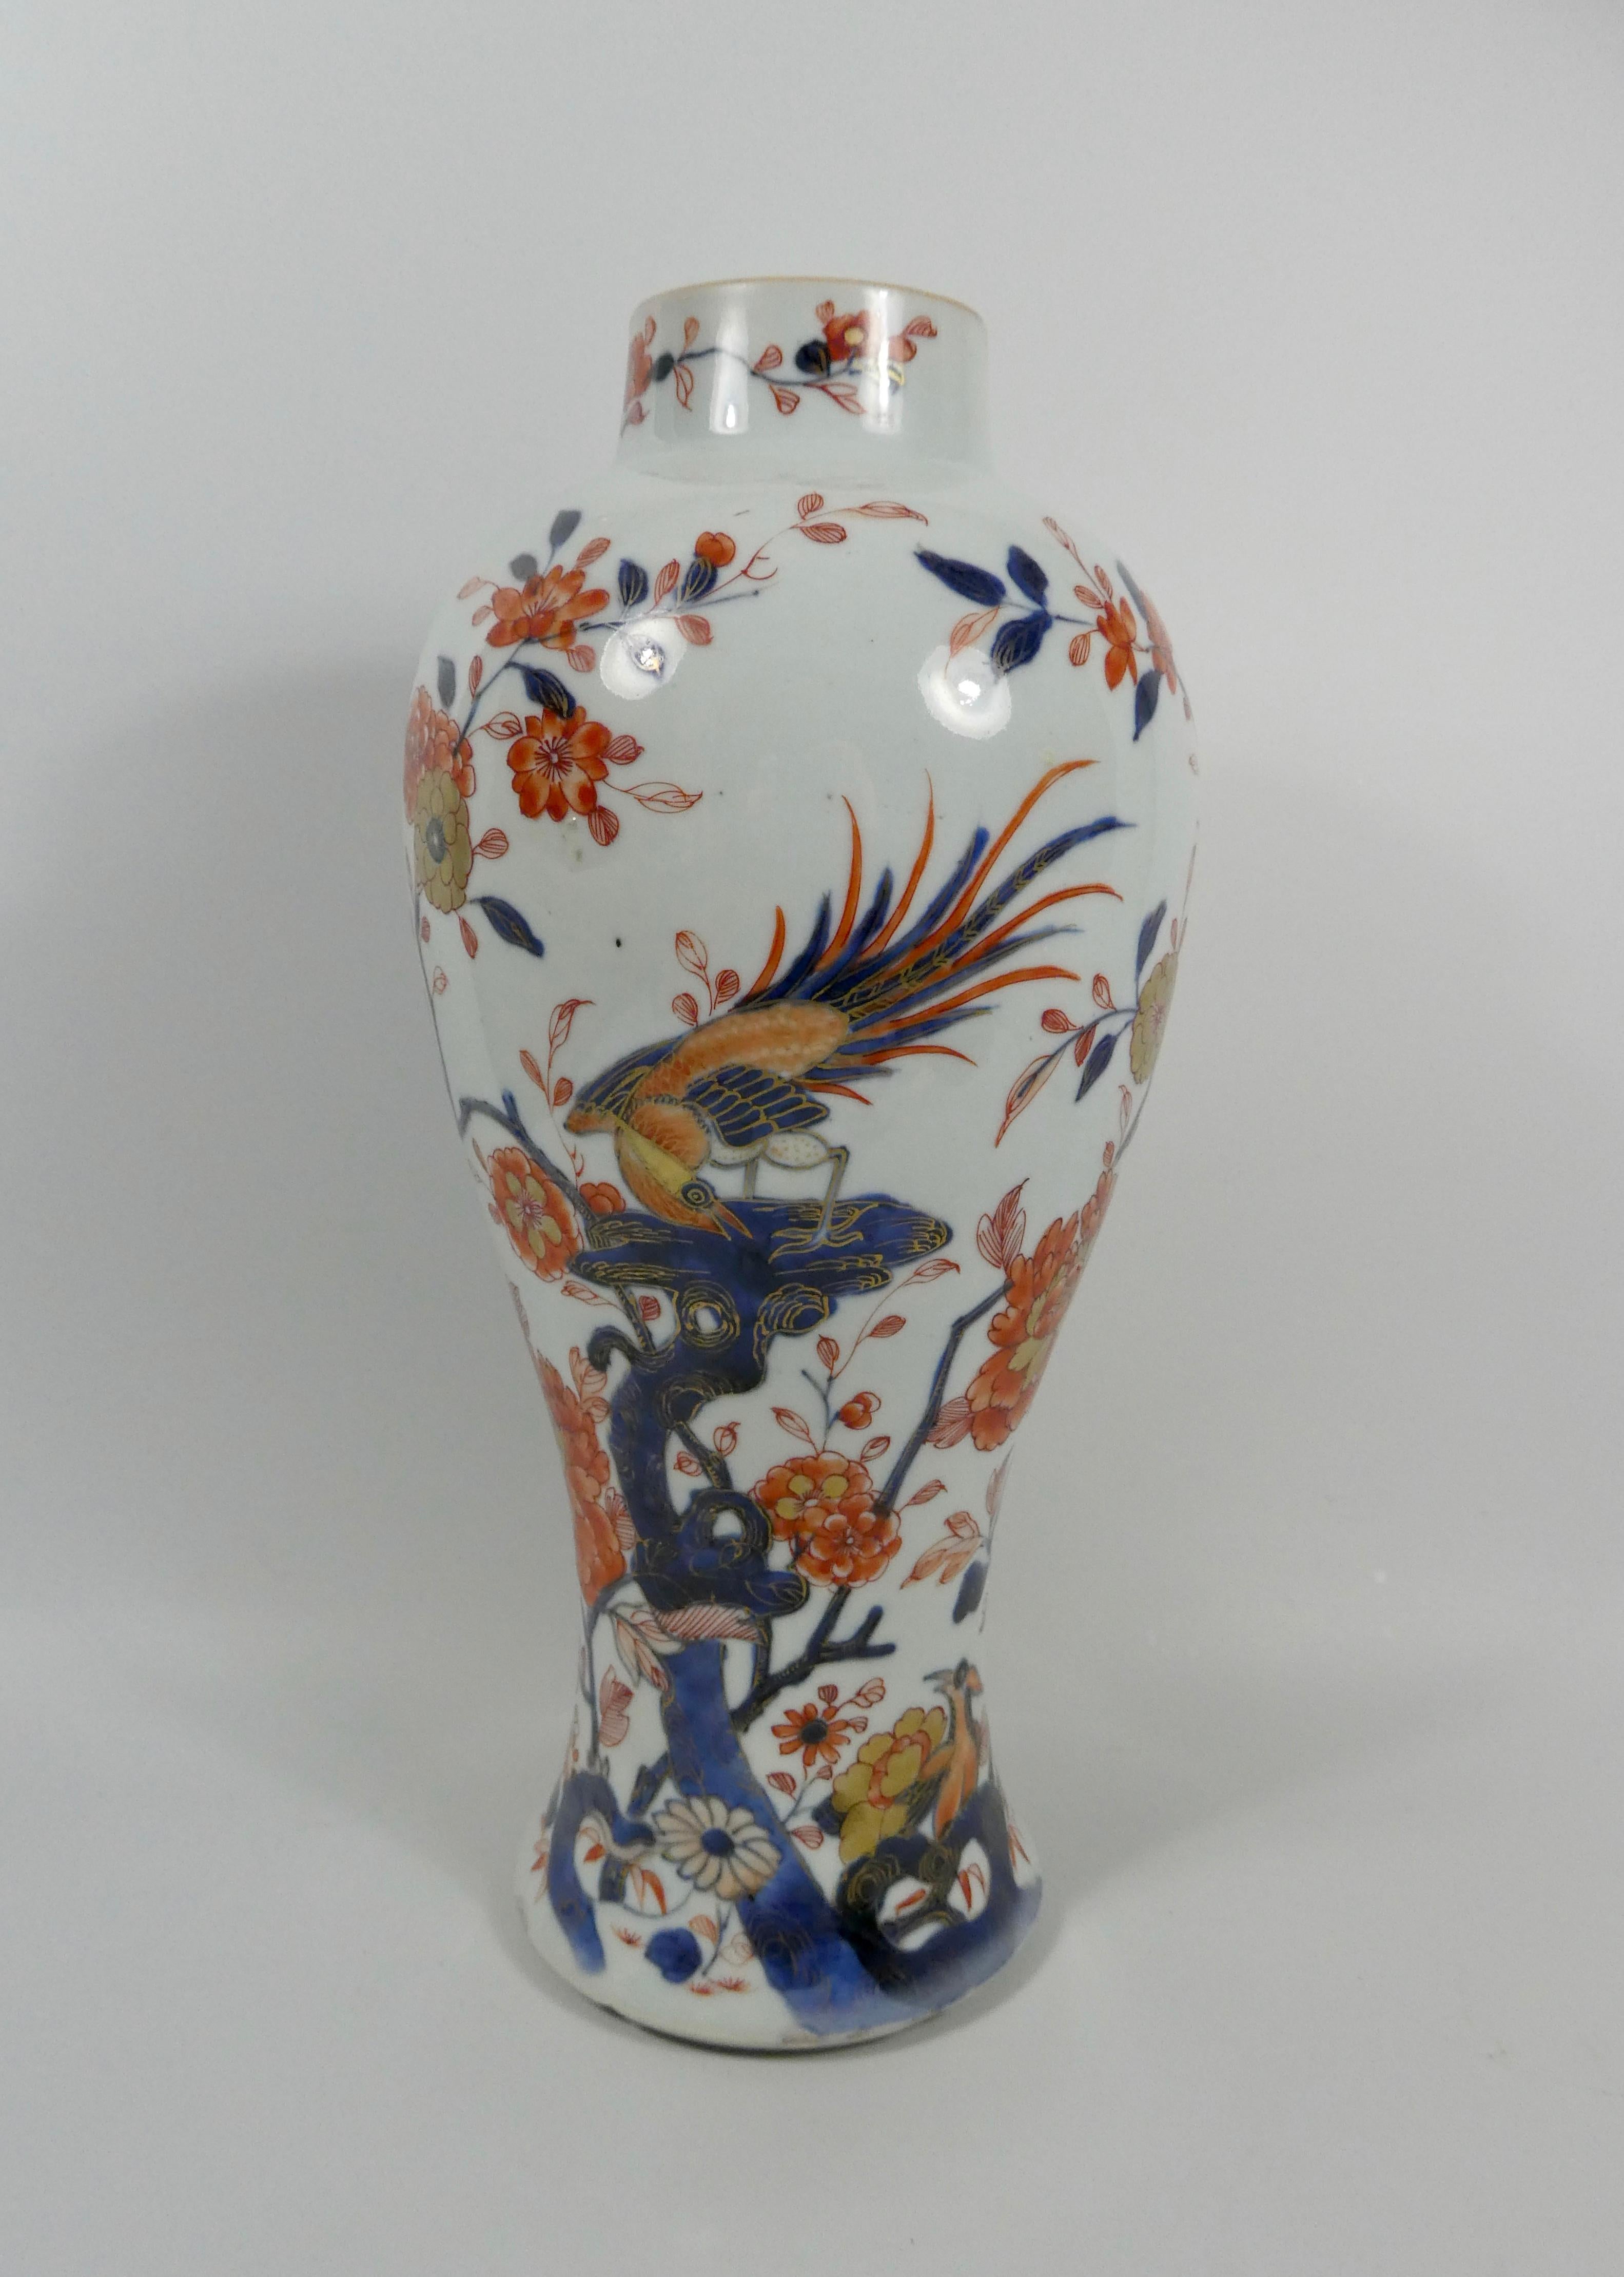 A rare garniture of large Chinese ‘Imari’ porcelain vases and covers, circa 1720, Kangxi period. Each elegant baluster shaped vase, well painted in the Imari style, with exotic birds, perched on rocks, amongst a profusion of flowering plants. The